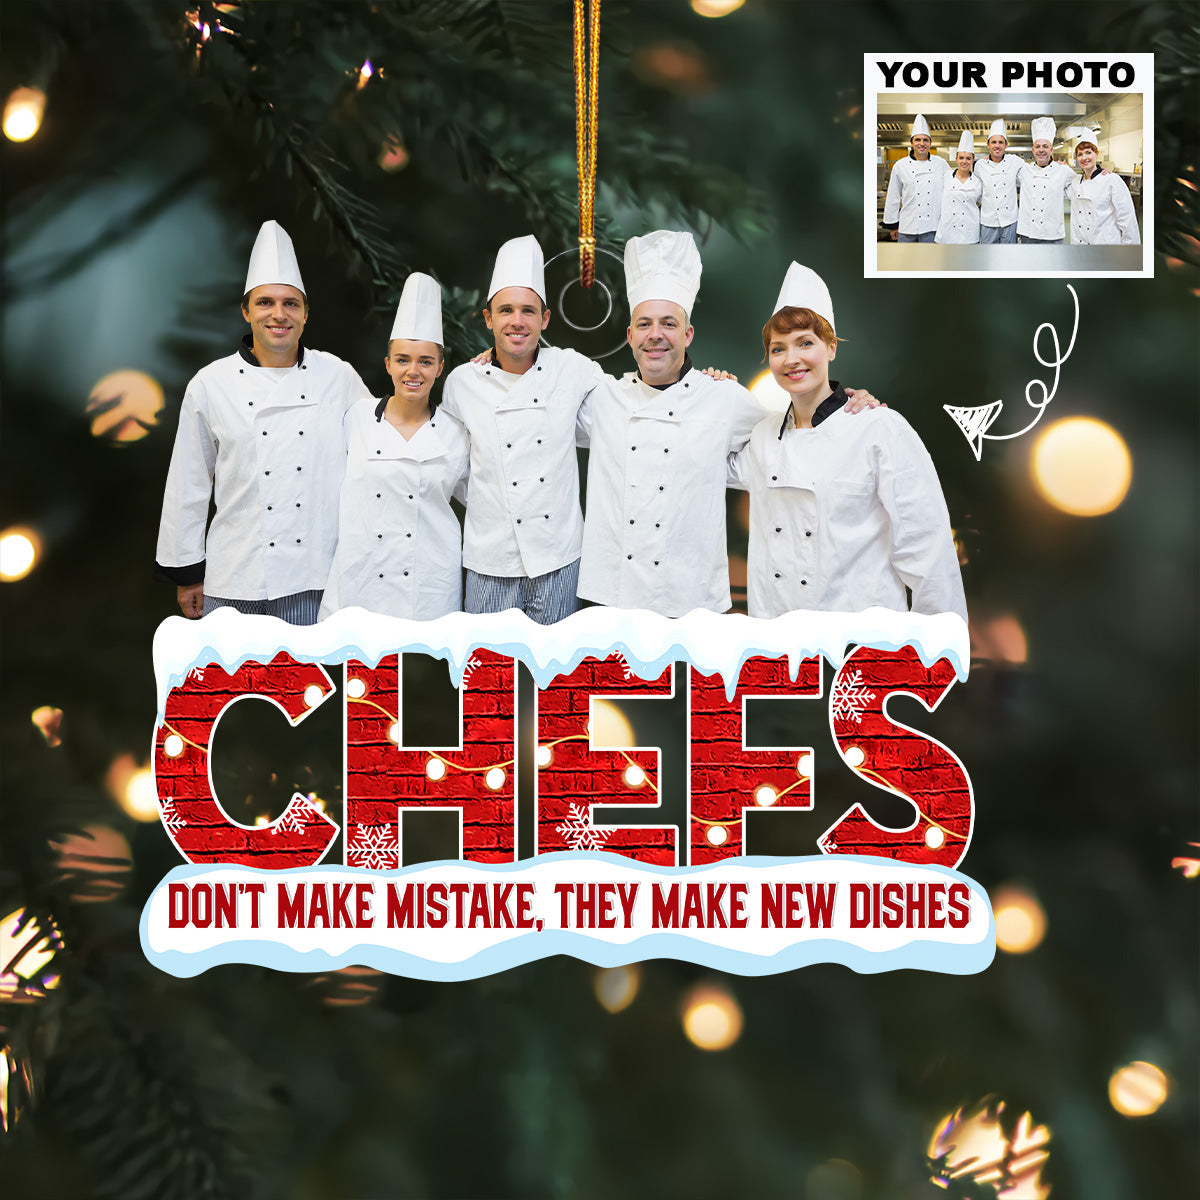 Personalized Chef Ornament | Gifts for Chefs